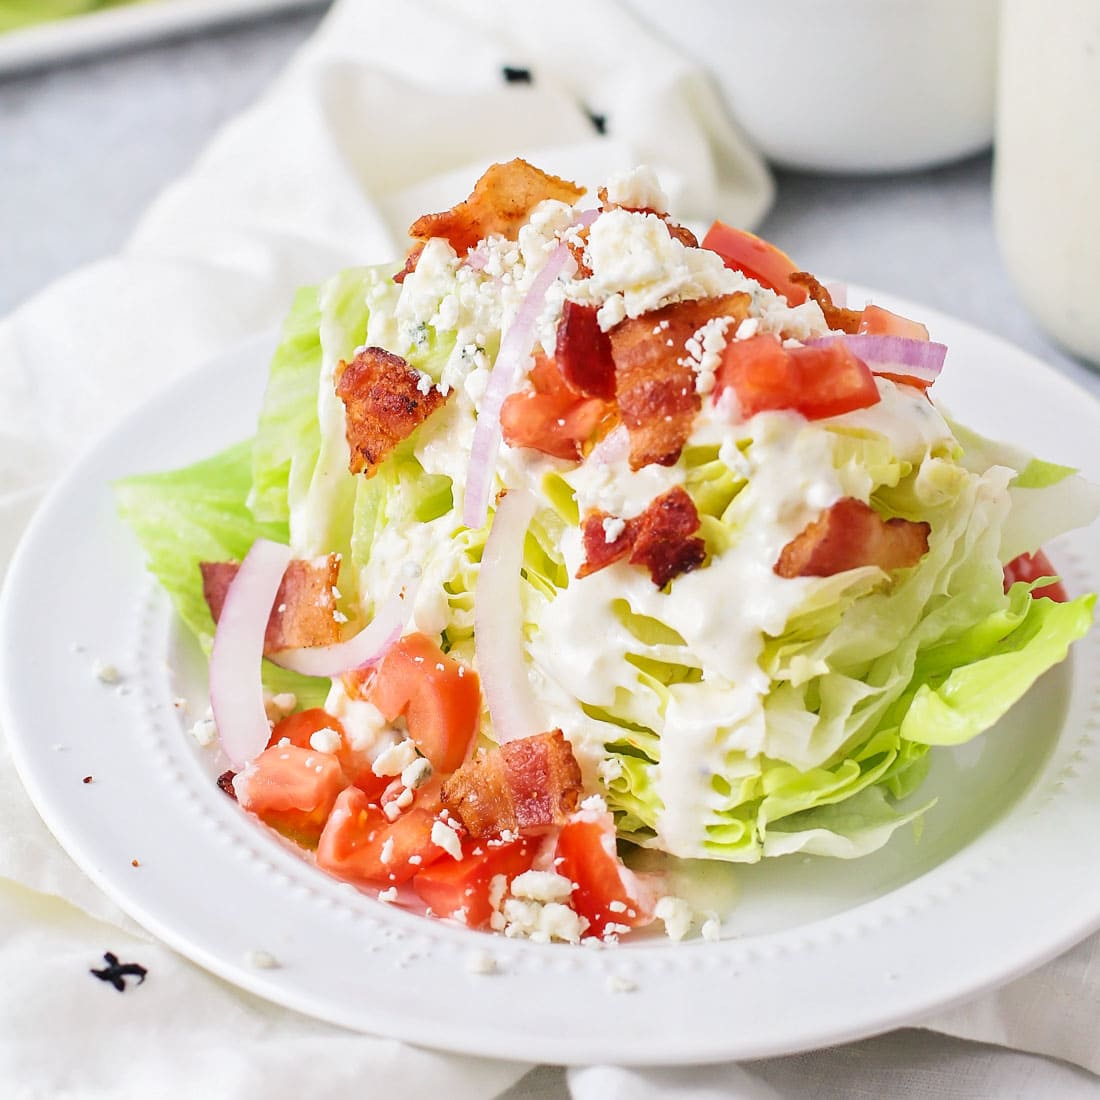 Wedge Salad served on a white plate.